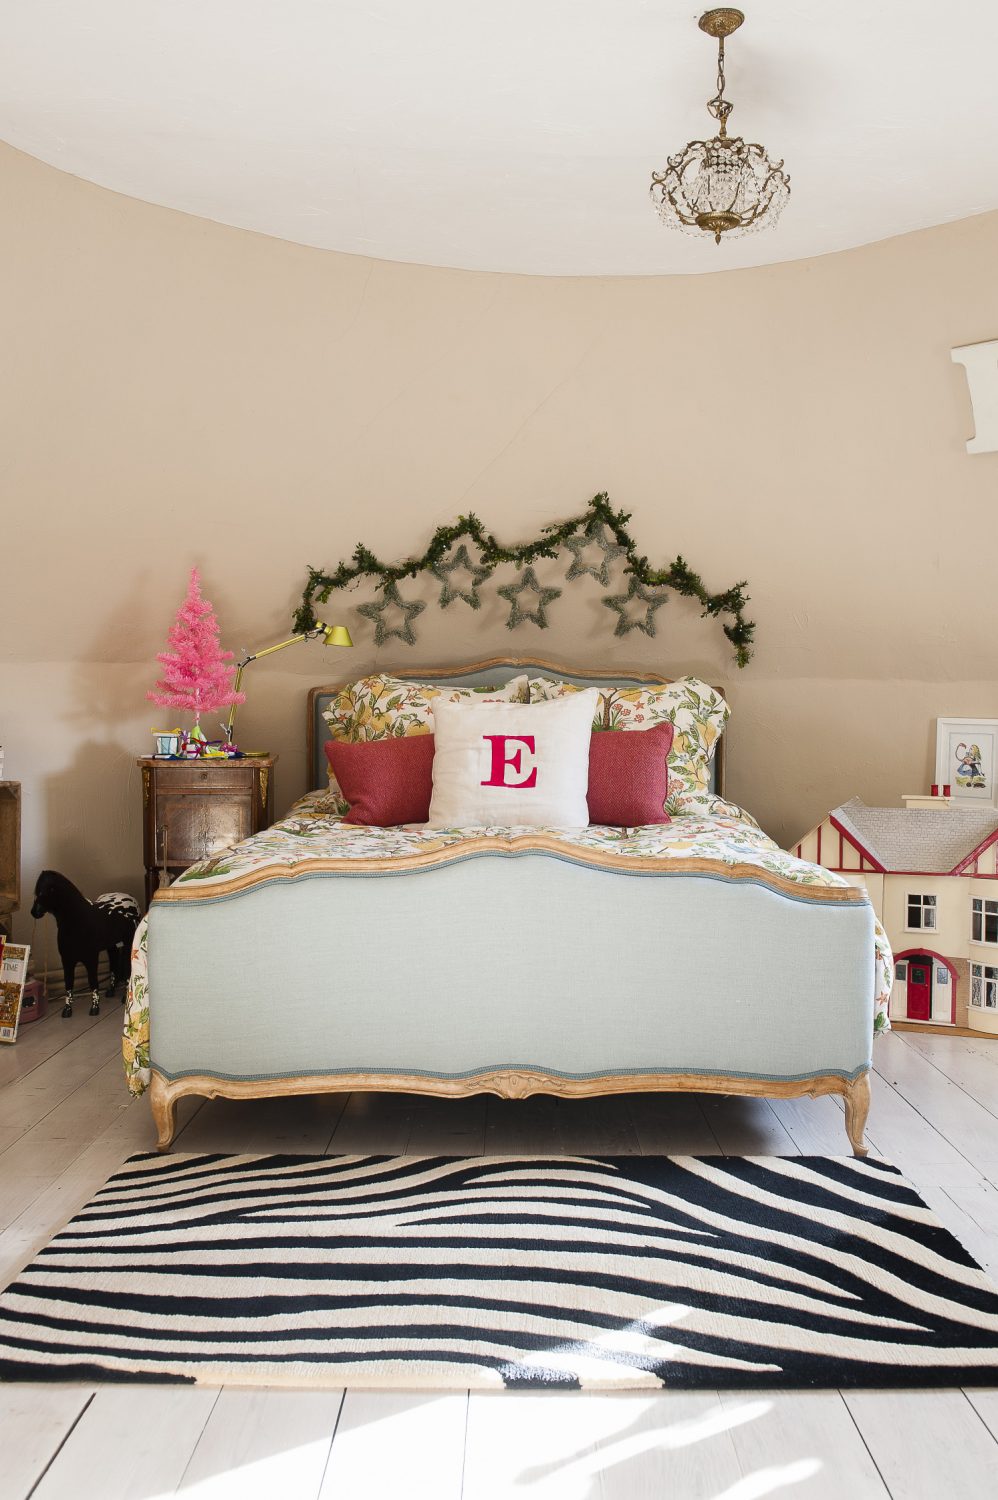 “I love beautiful beds,” says Kali, “I spend a long time finding exactly the right one for each room.” The children each have a cushion with their initials on – this one has a big rosy red E for her daughter.